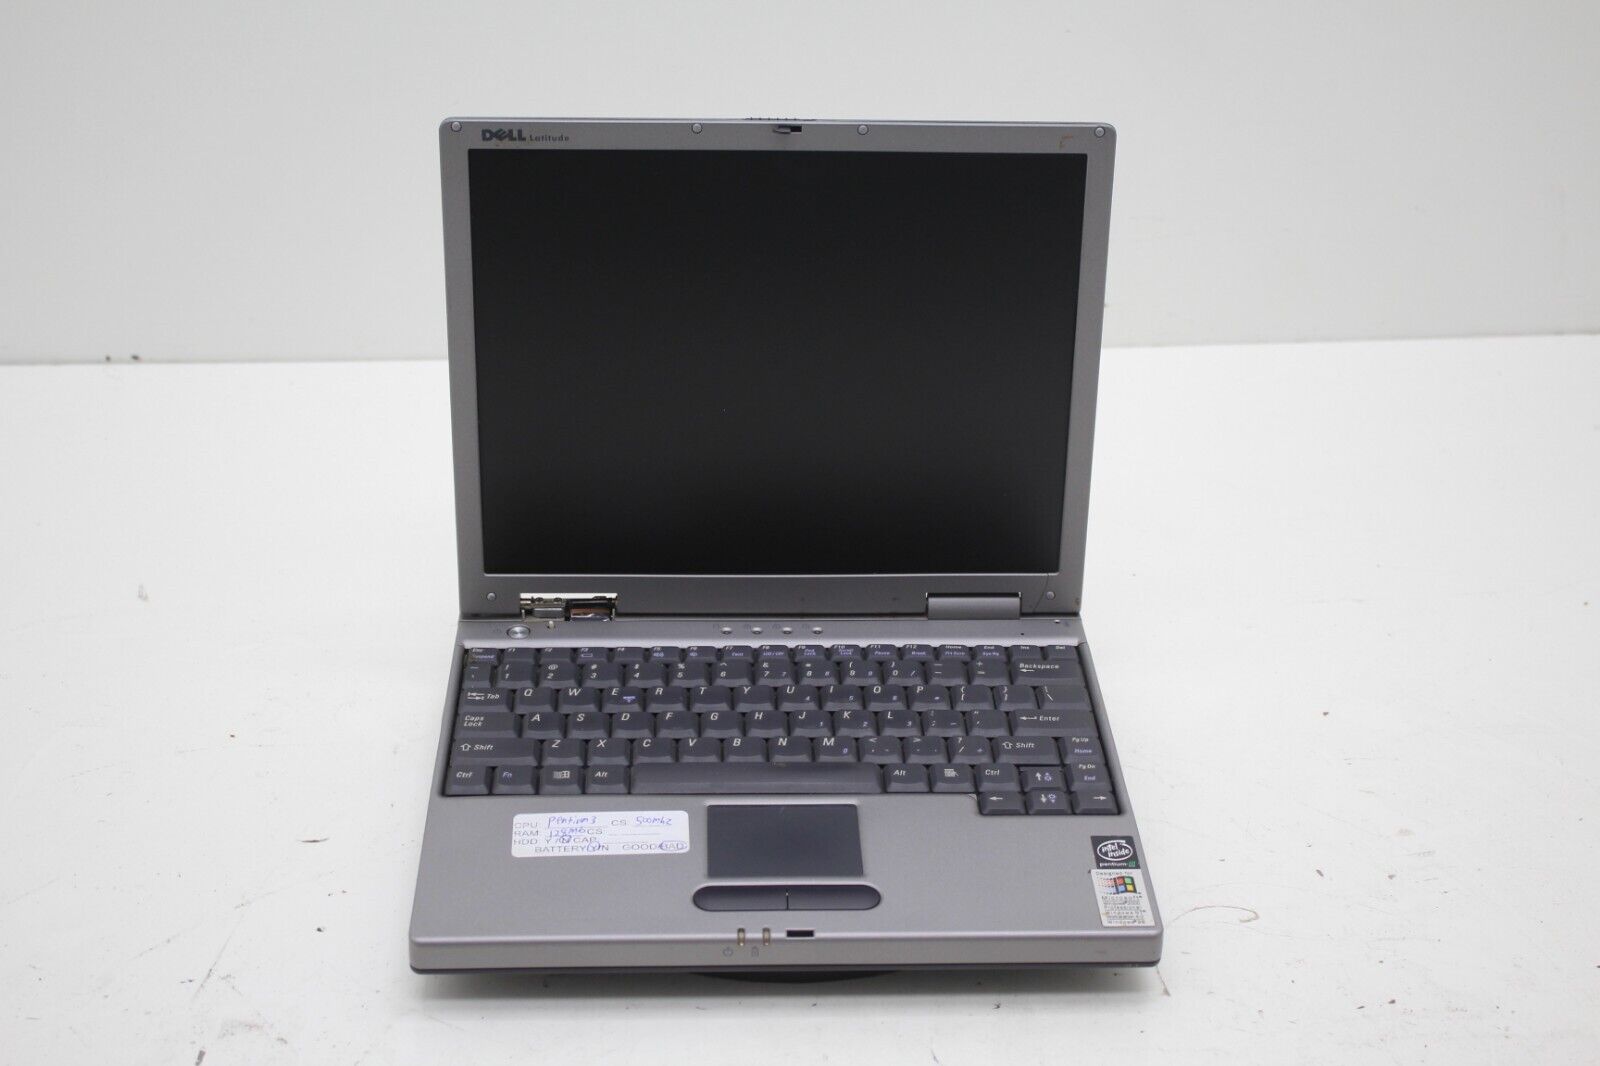 DELL LATITUDE LS PP01S LAPTOP P3 500MHz 128MB No HDD & Bad Battery